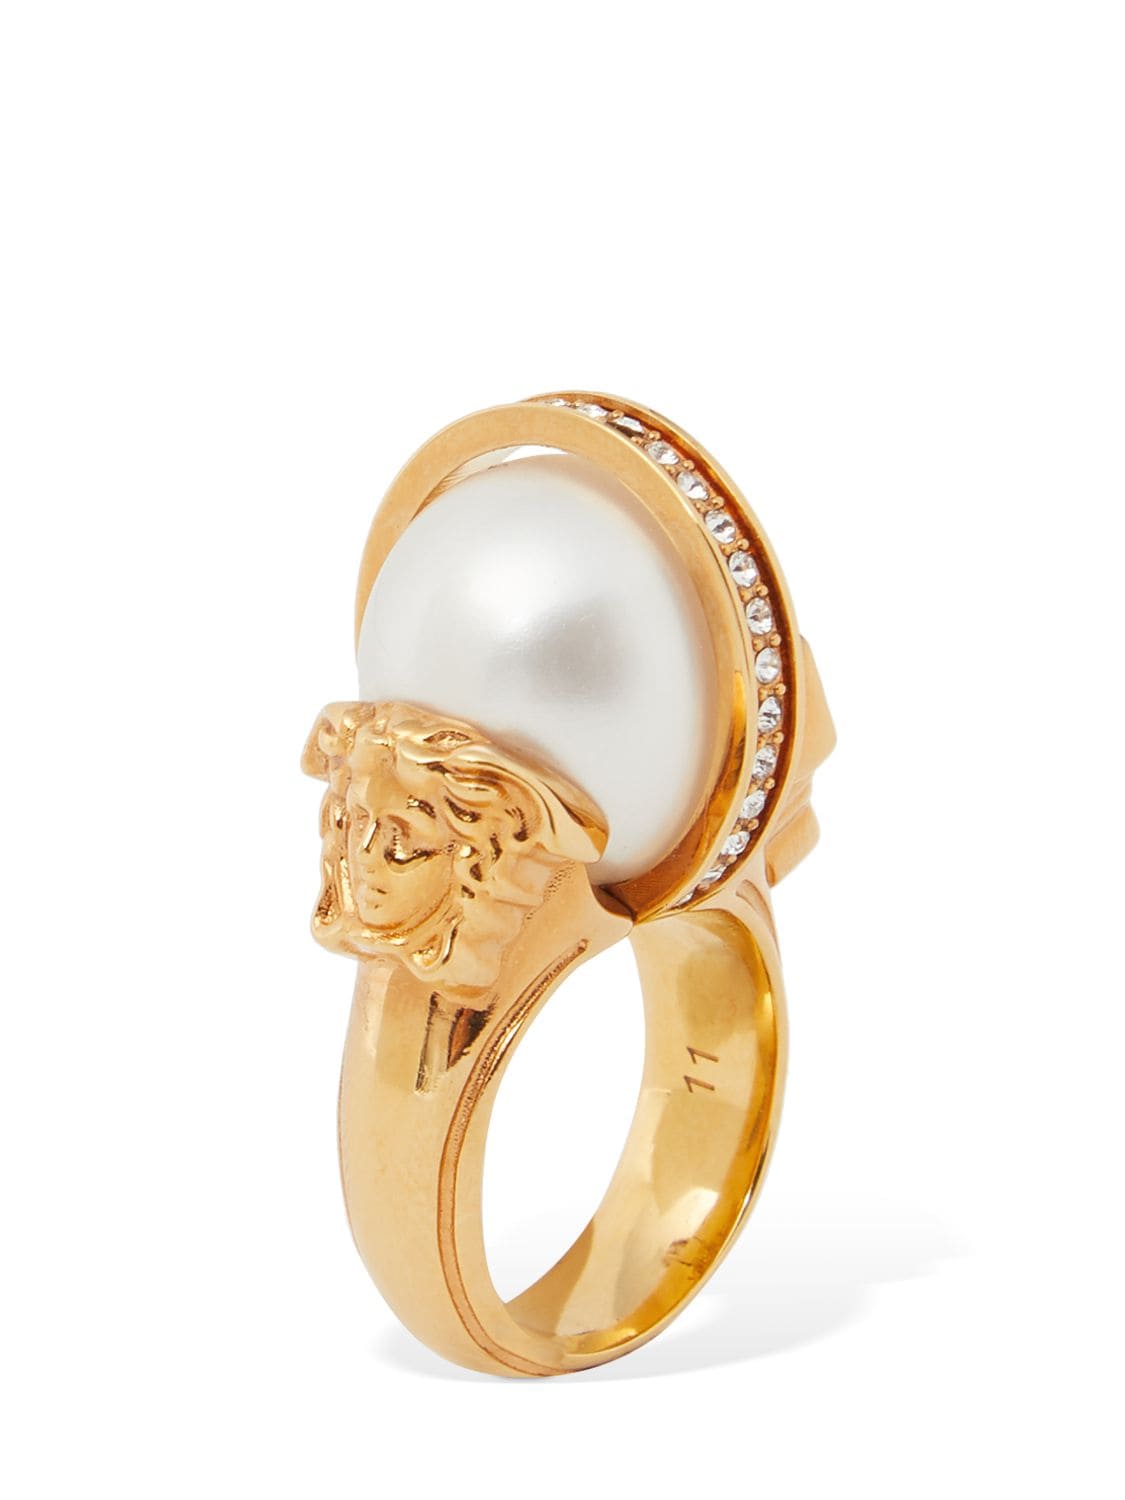 VERSACE Medusa Faux Pearl & Crystal Ring